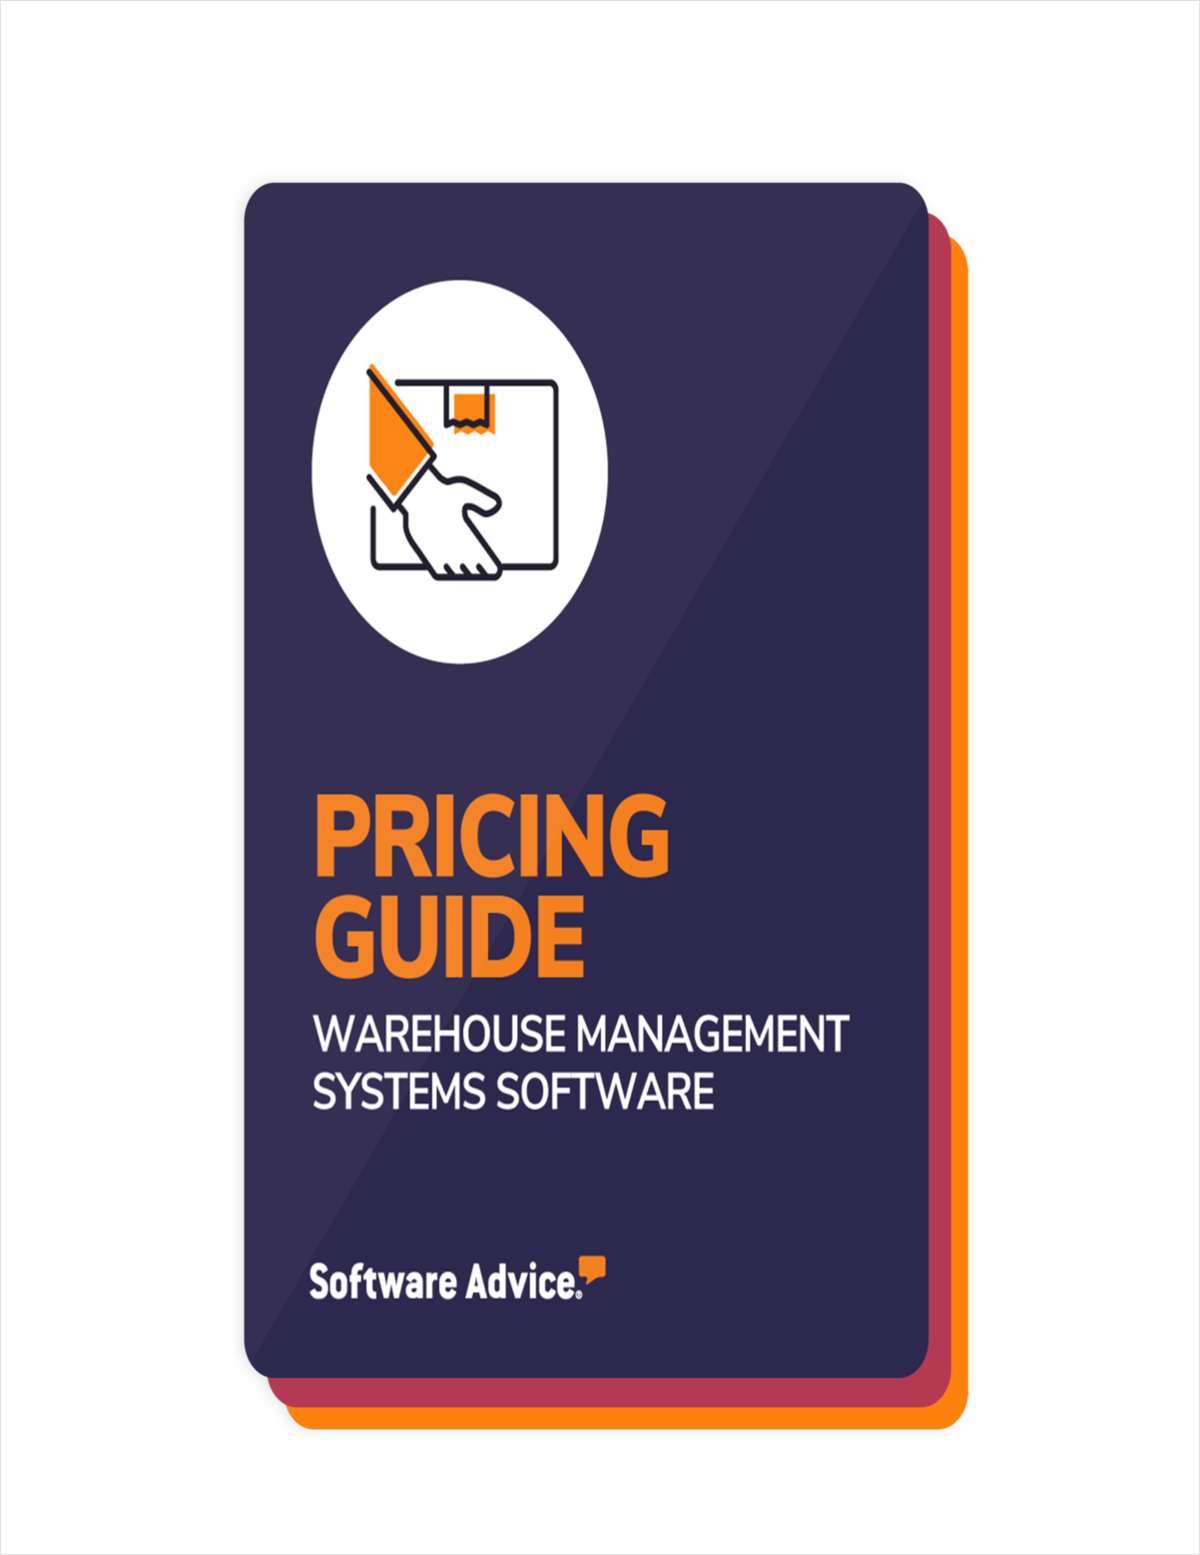 Don't Overpay: What to Know About Warehouse Management Systems Software Prices in 2022